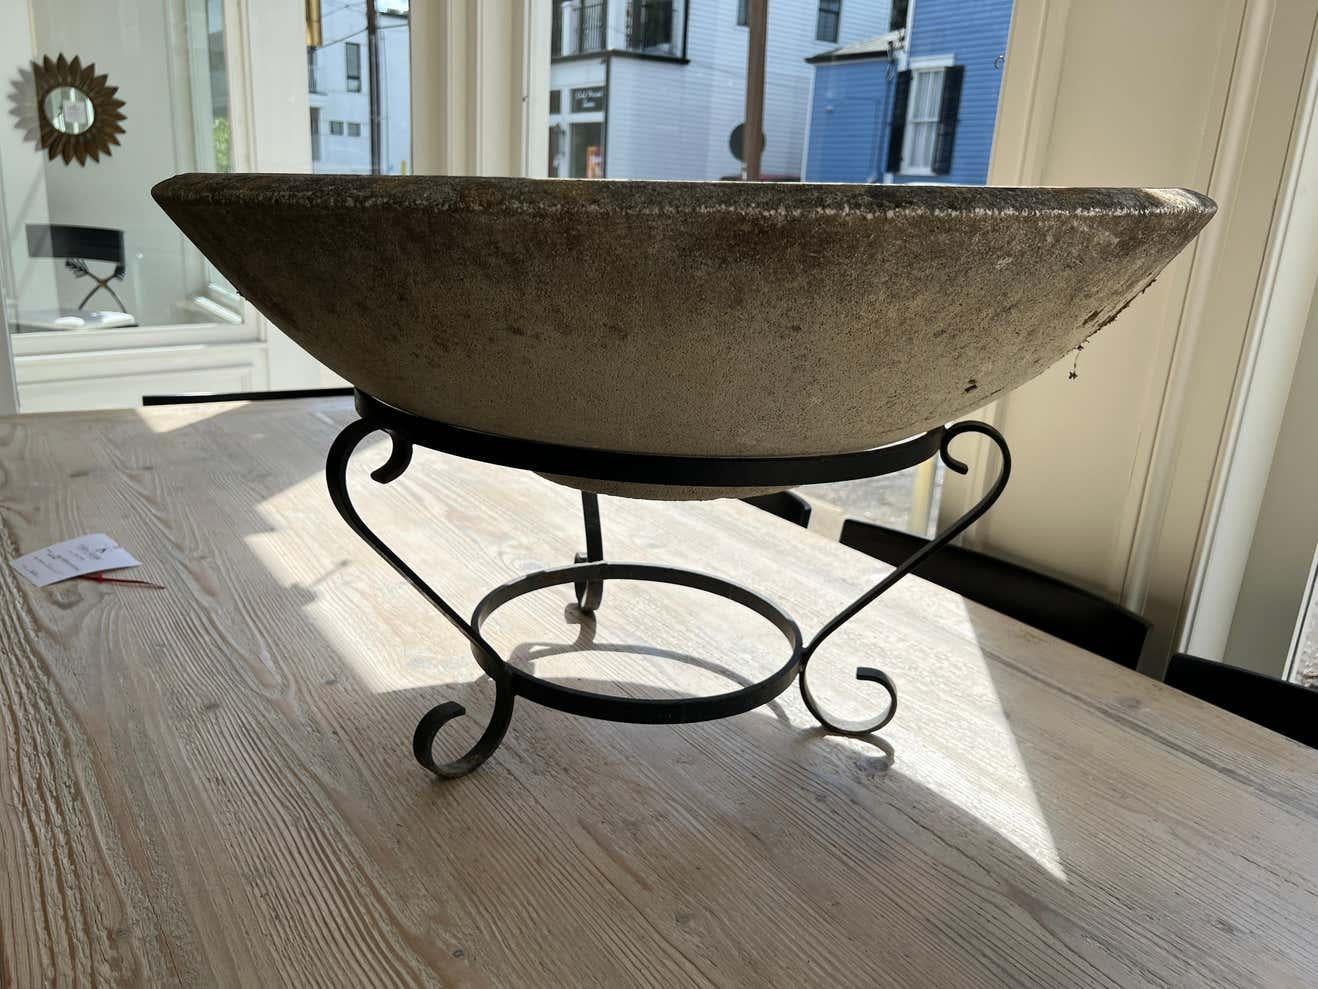 Very large concrete planter on a beautiful wrought iron base. Appropriate for indoor or outdoor use.